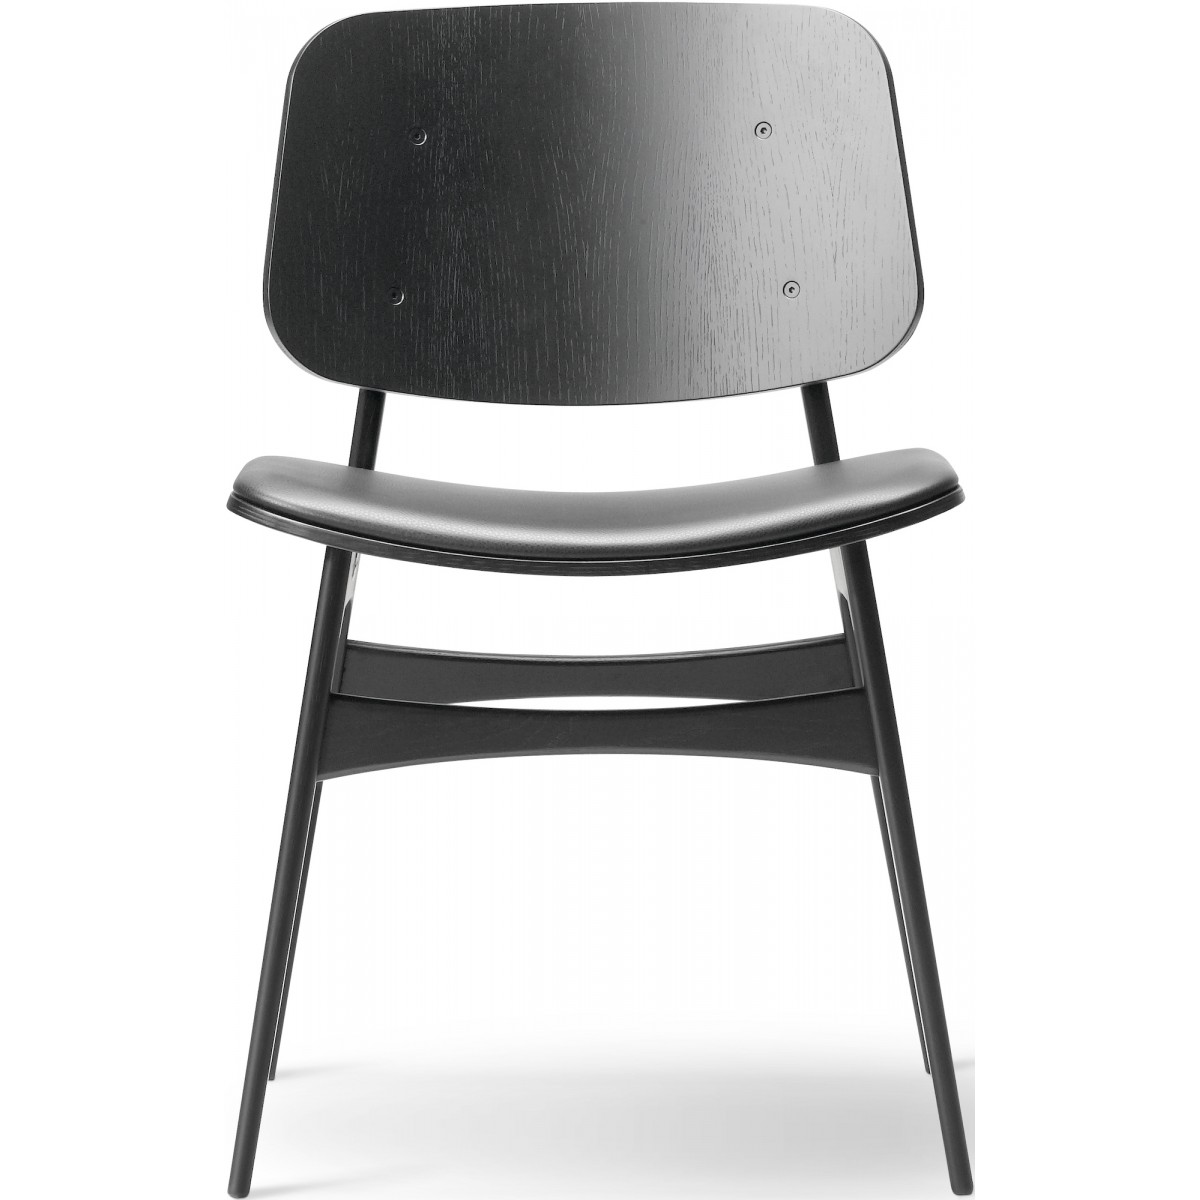 SOLD OUT 88 black Primo leather + black lacquered oak – seat upholstered – 3051 Søborg chair